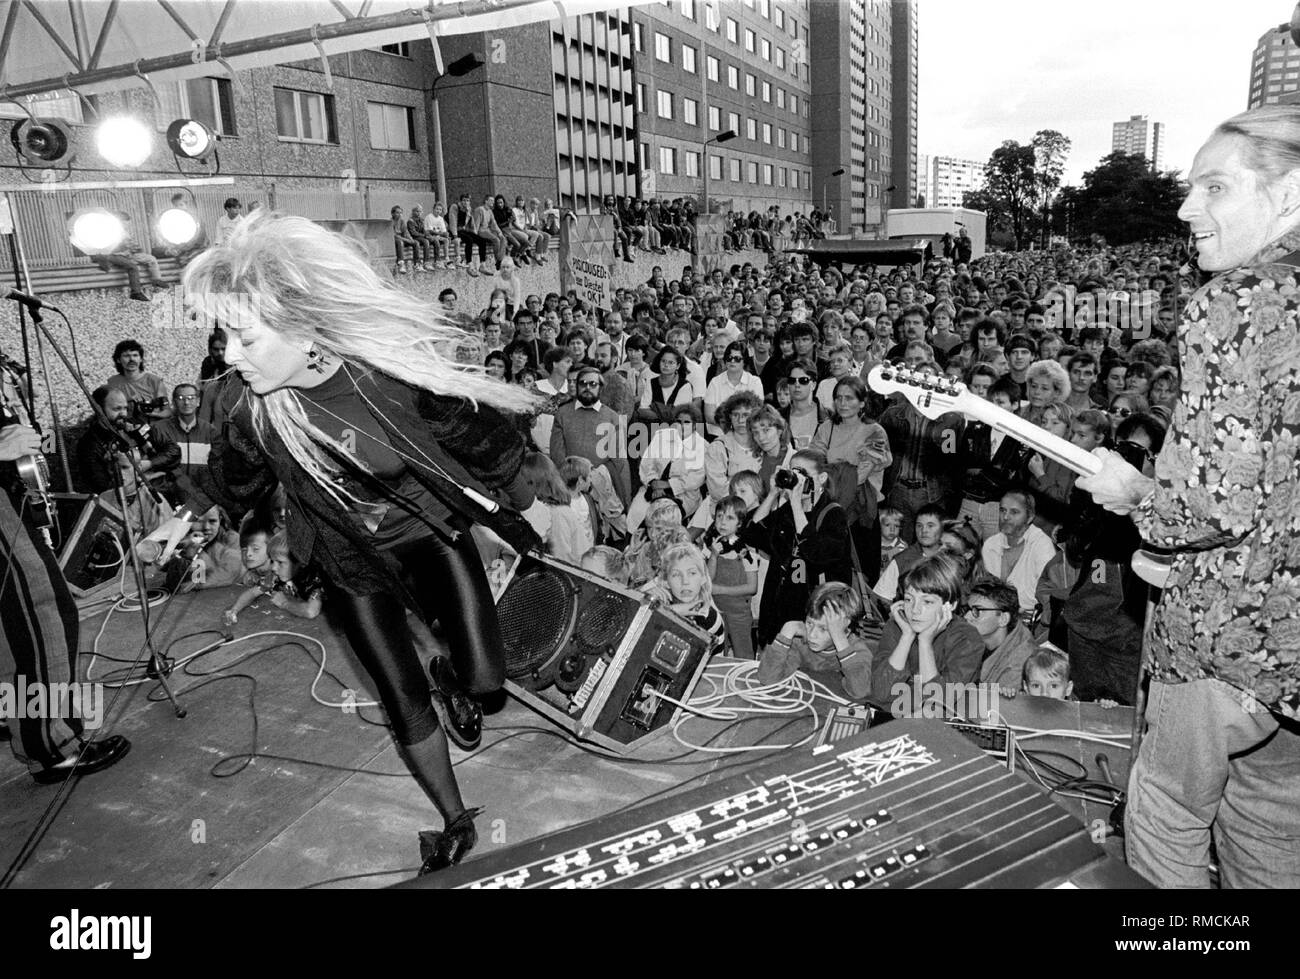 Stasi - headquarters in the Normannenstrasse, Silly in concert, Tamara Danz, on the occasion of an occupation by civil rights activists who want to prevent the destruction of files, Germany, Berlin-Lichtenberg, 16.09.1990. Stock Photo